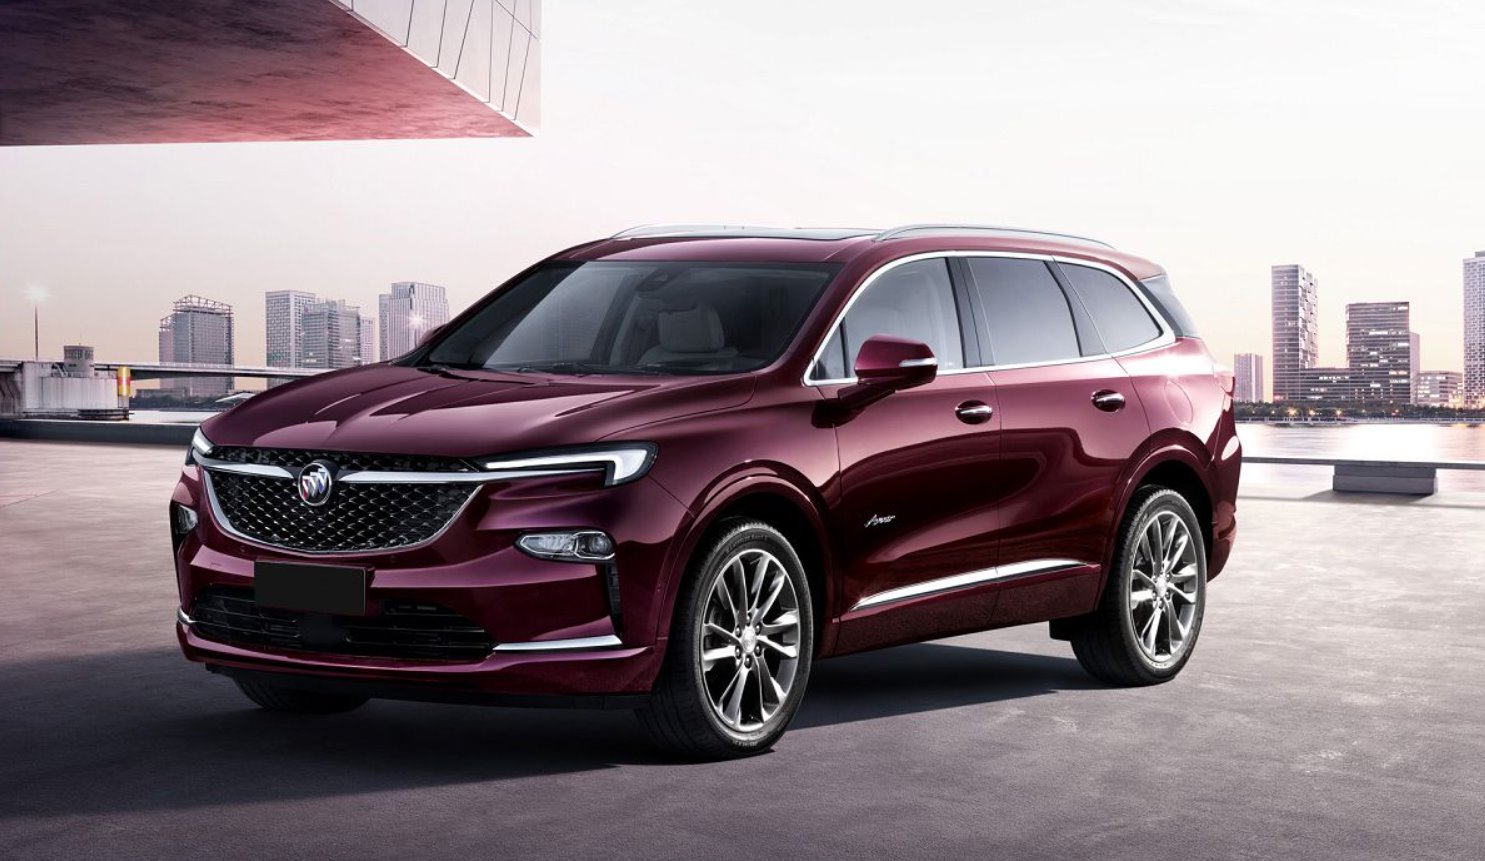 New 2022 Buick Enclave Changes, Colors, Interior | 2022 Buick